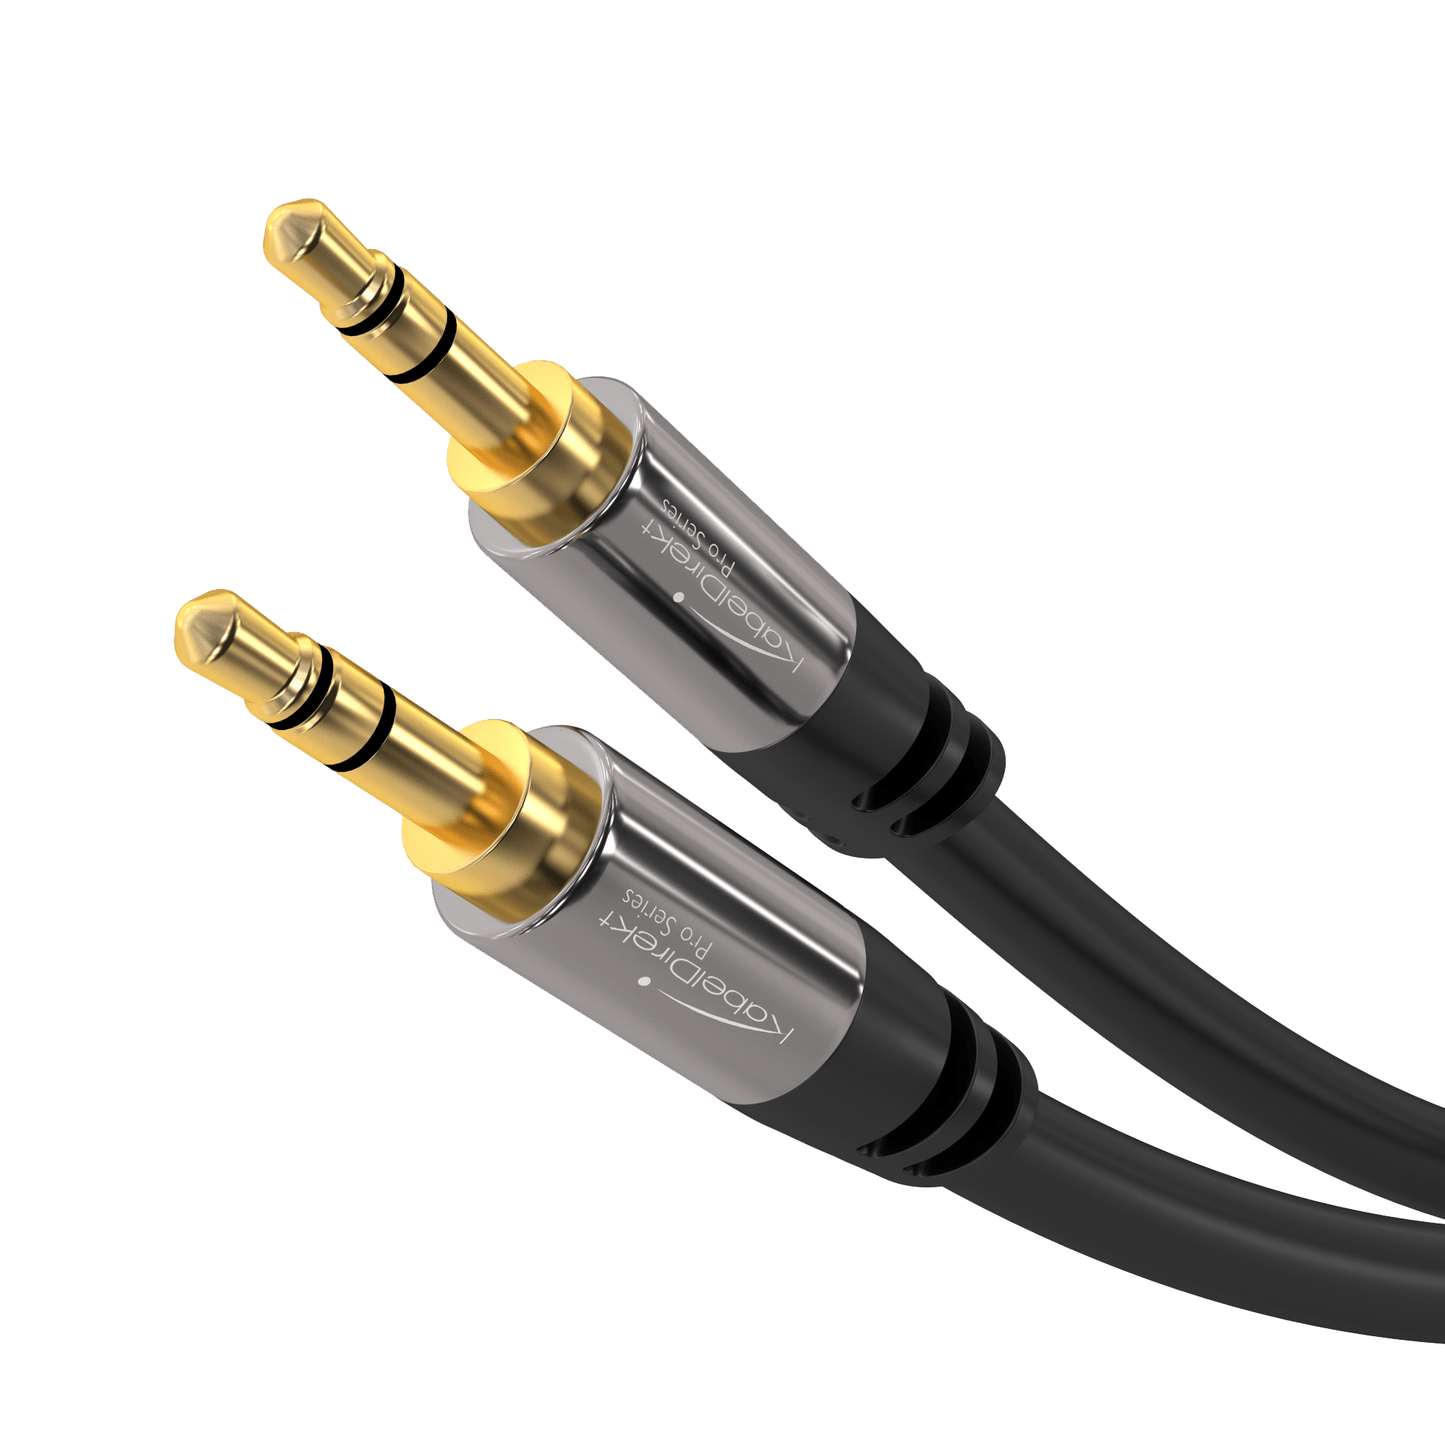 AUX audio & jack cable - designed to be indestructible & ideally suited for iPhones, iPads, smartphones, cars - black